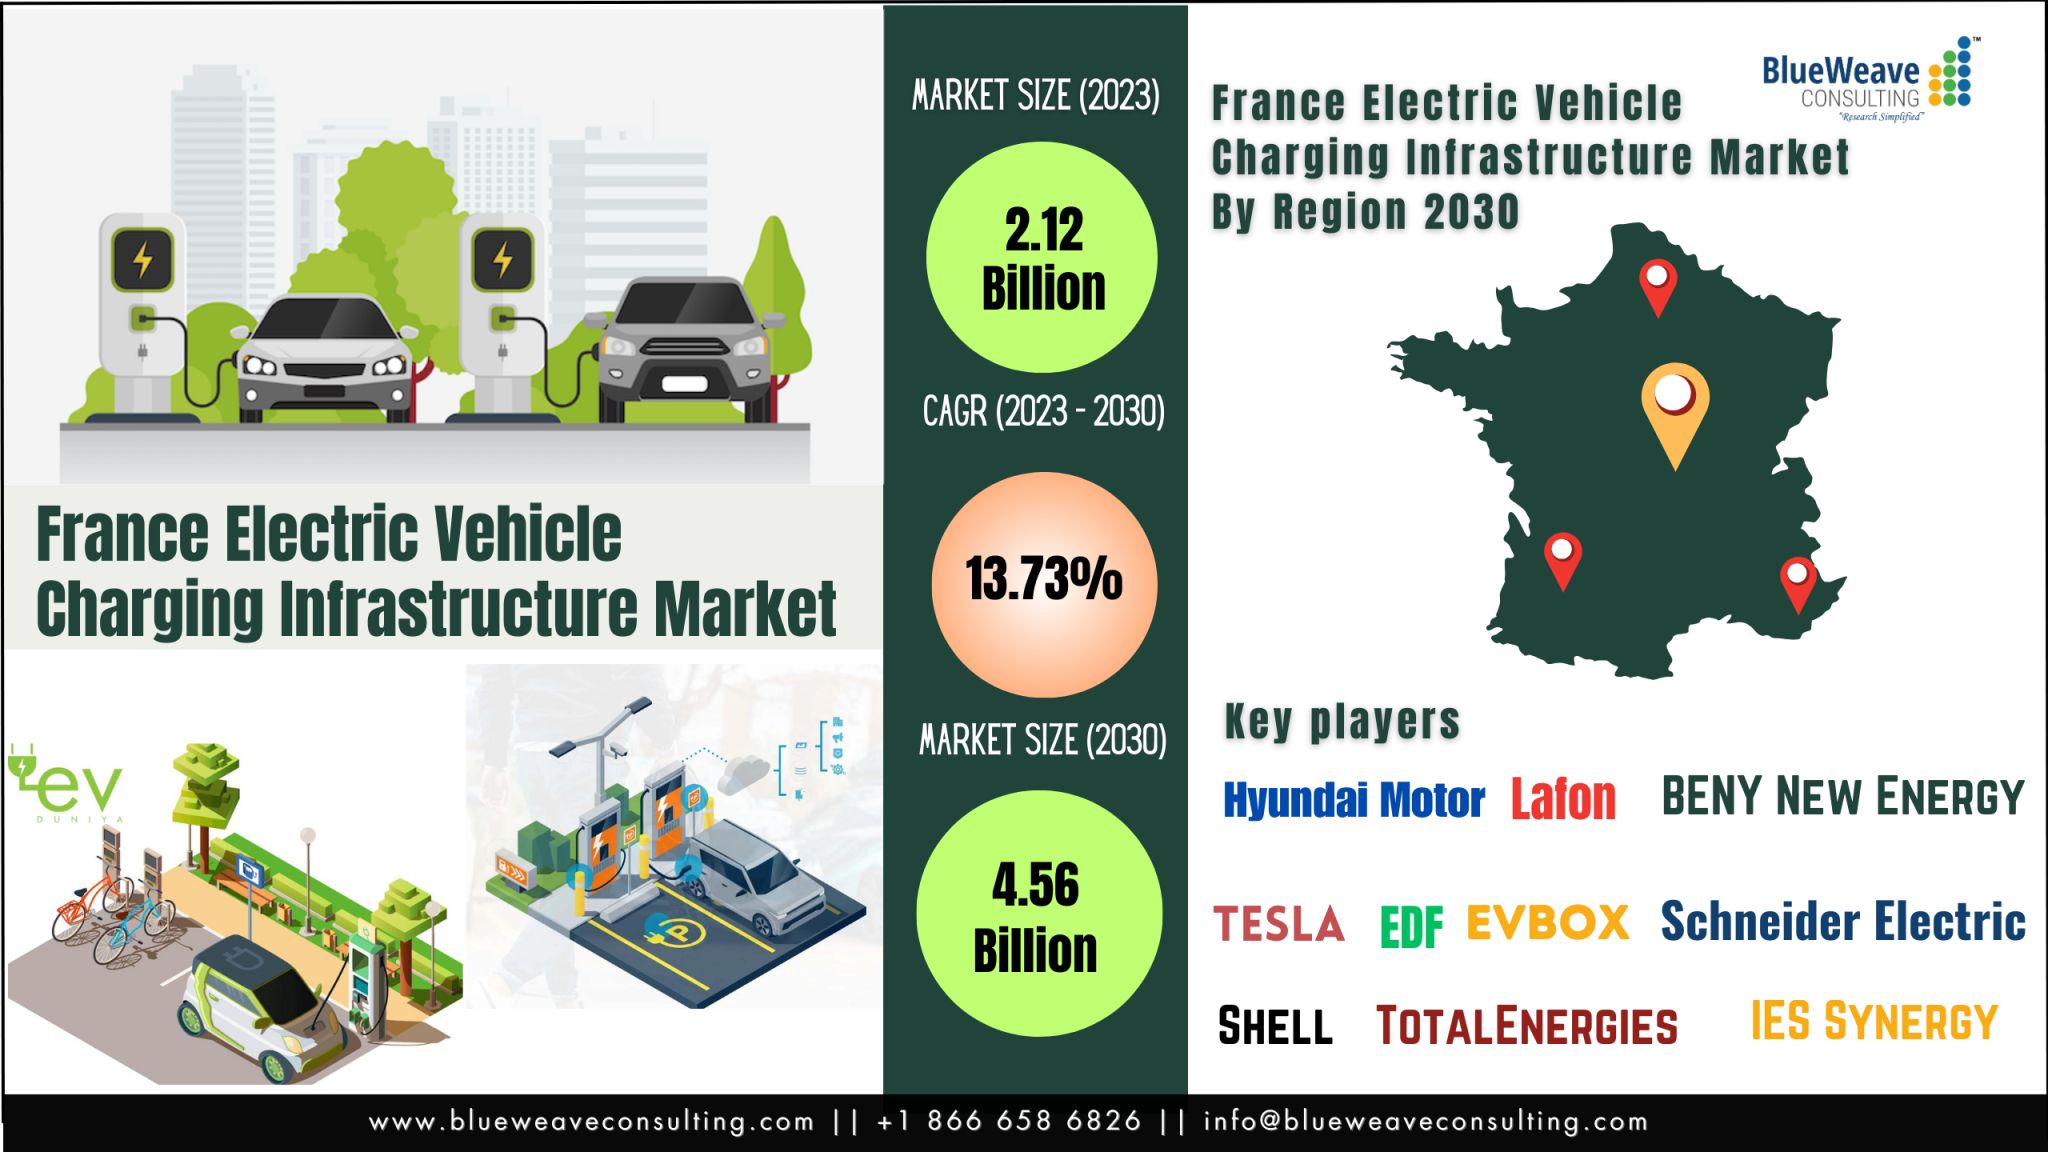 France Electric Vehicle Charging Infrastructure Market